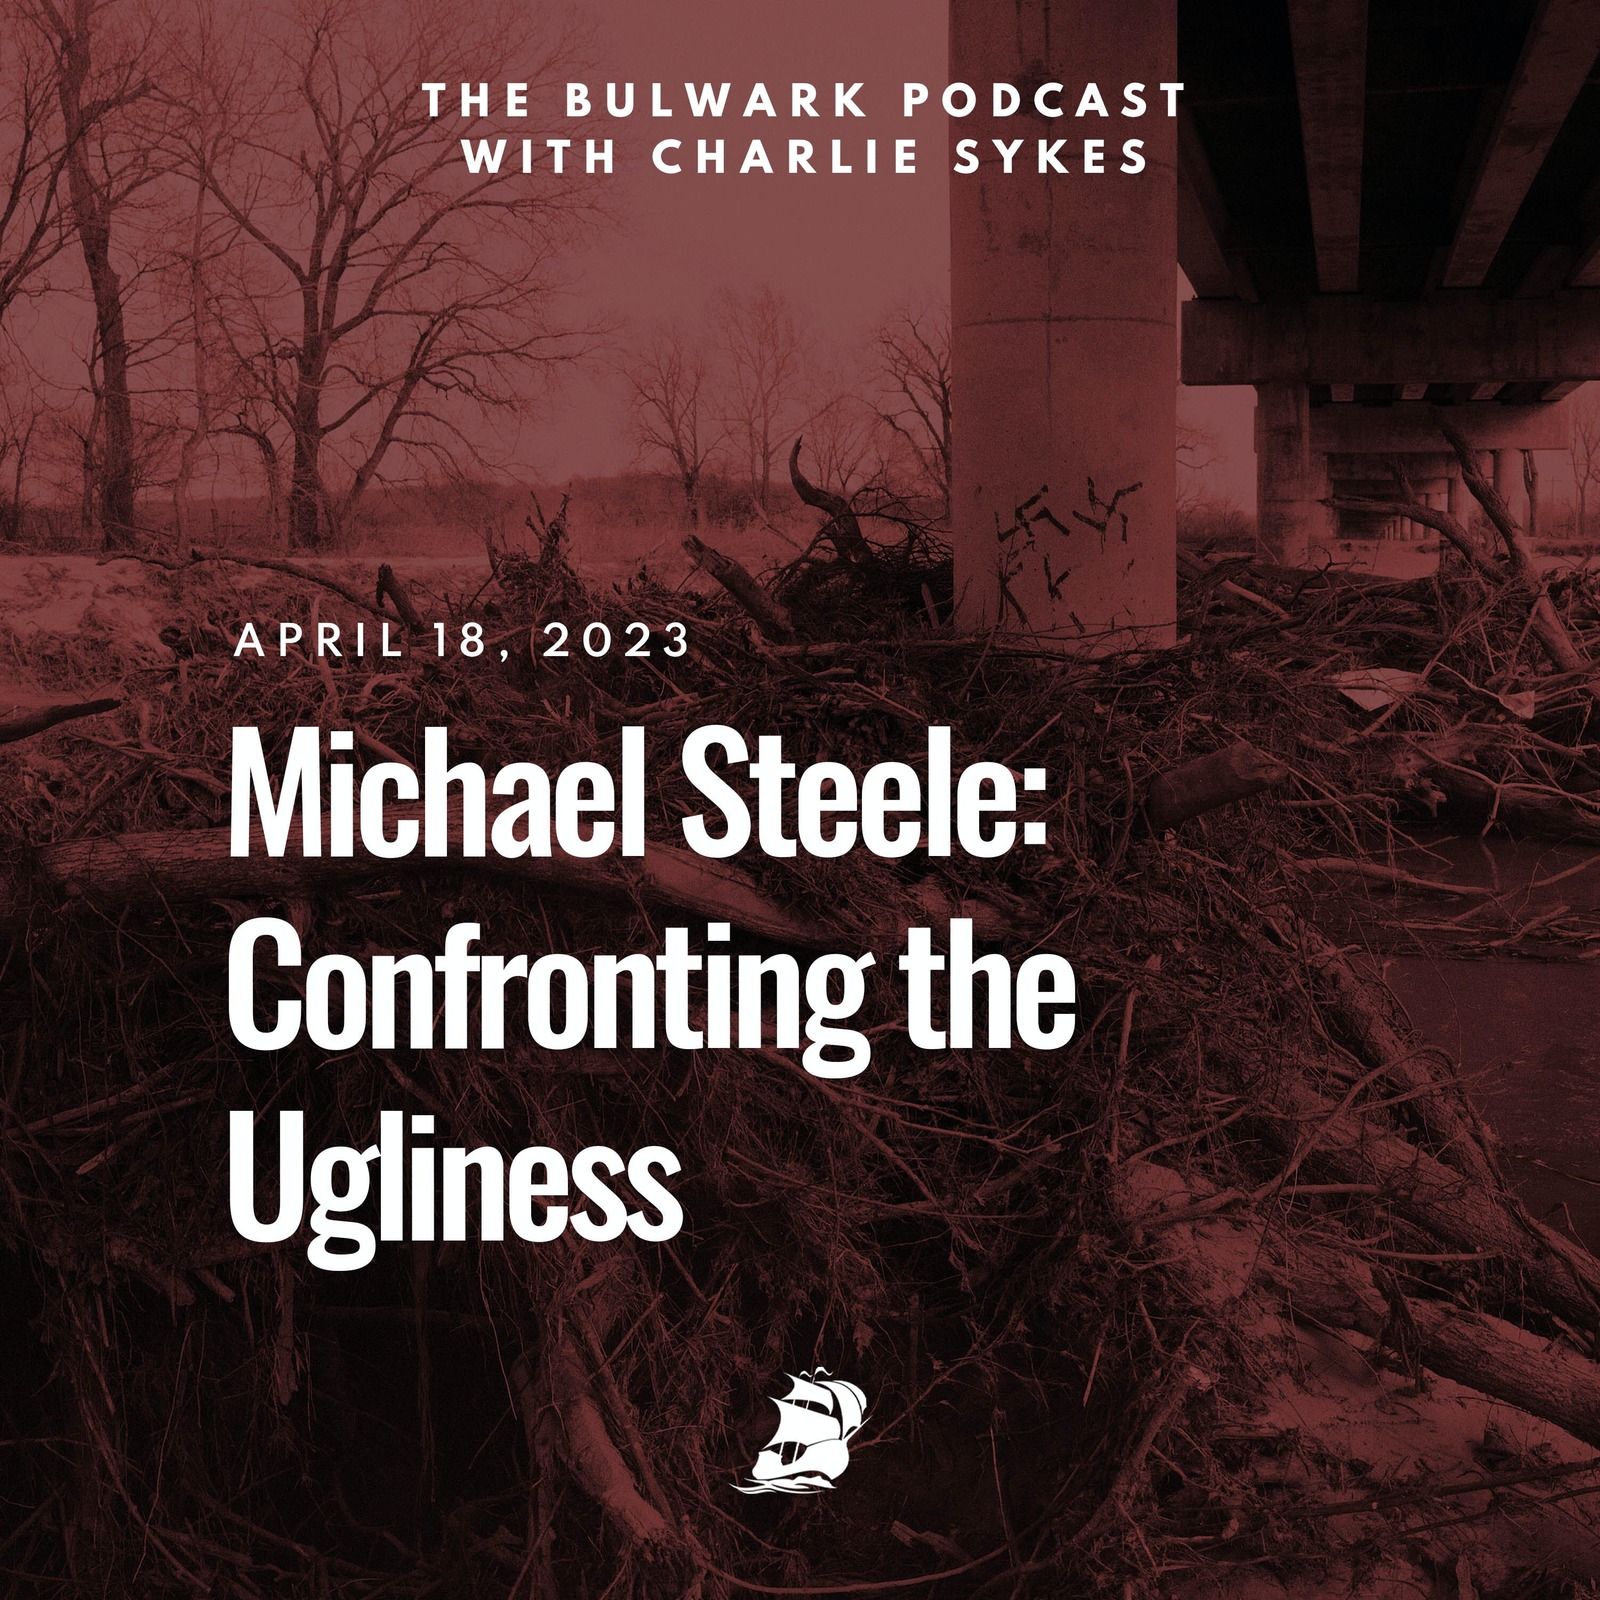 Michael Steele: Confronting the Ugliness by The Bulwark Podcast